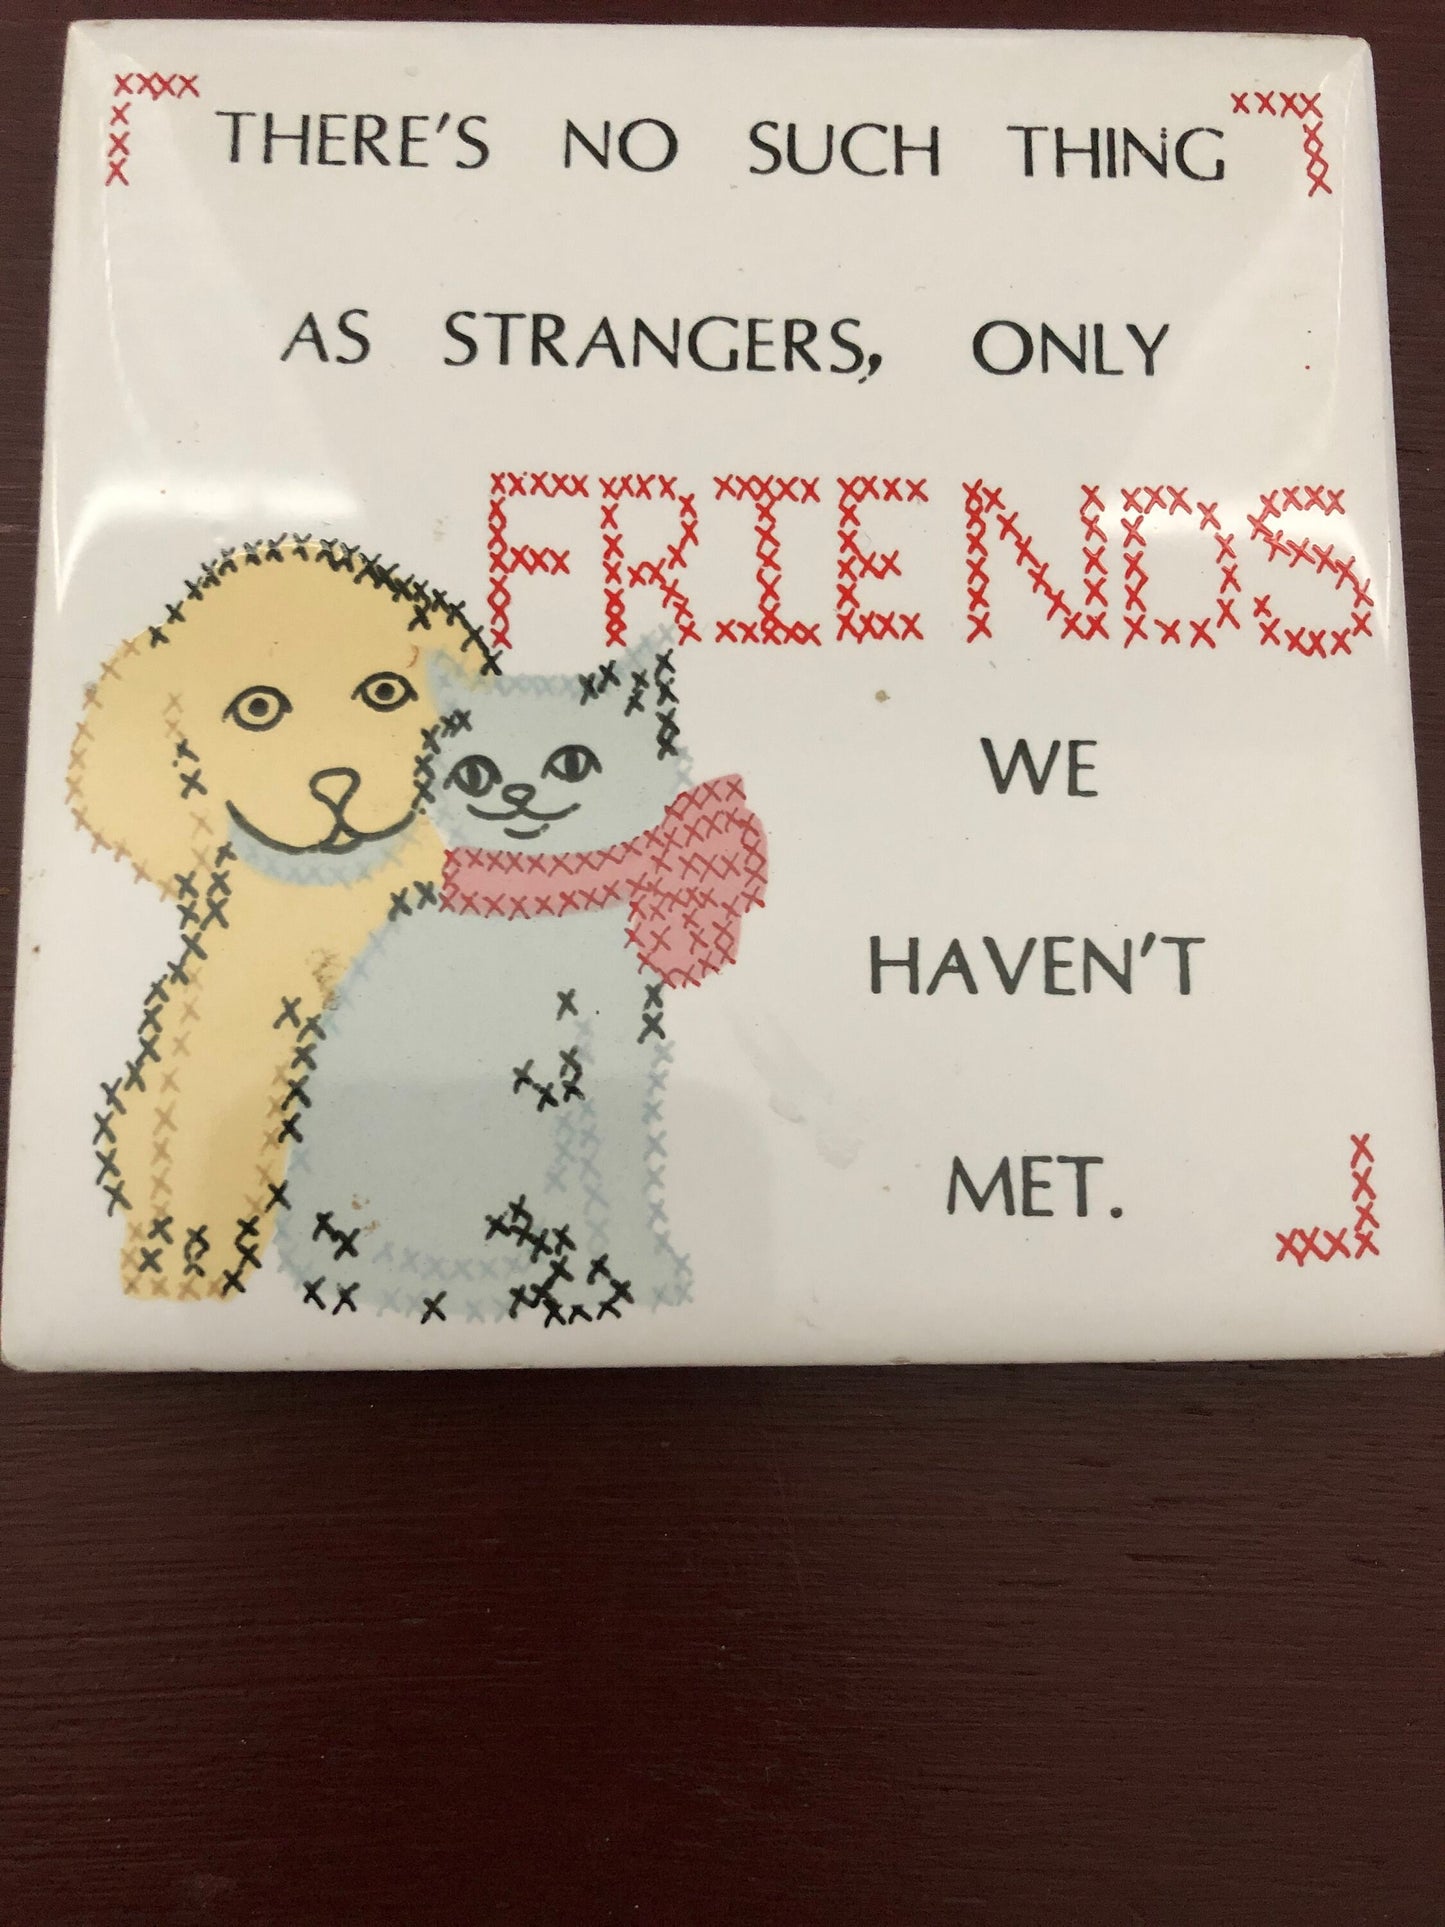 Theres no such thing as strangers, only FRIENDS we haven't met., Vintage Collectible 1985, tile trivet